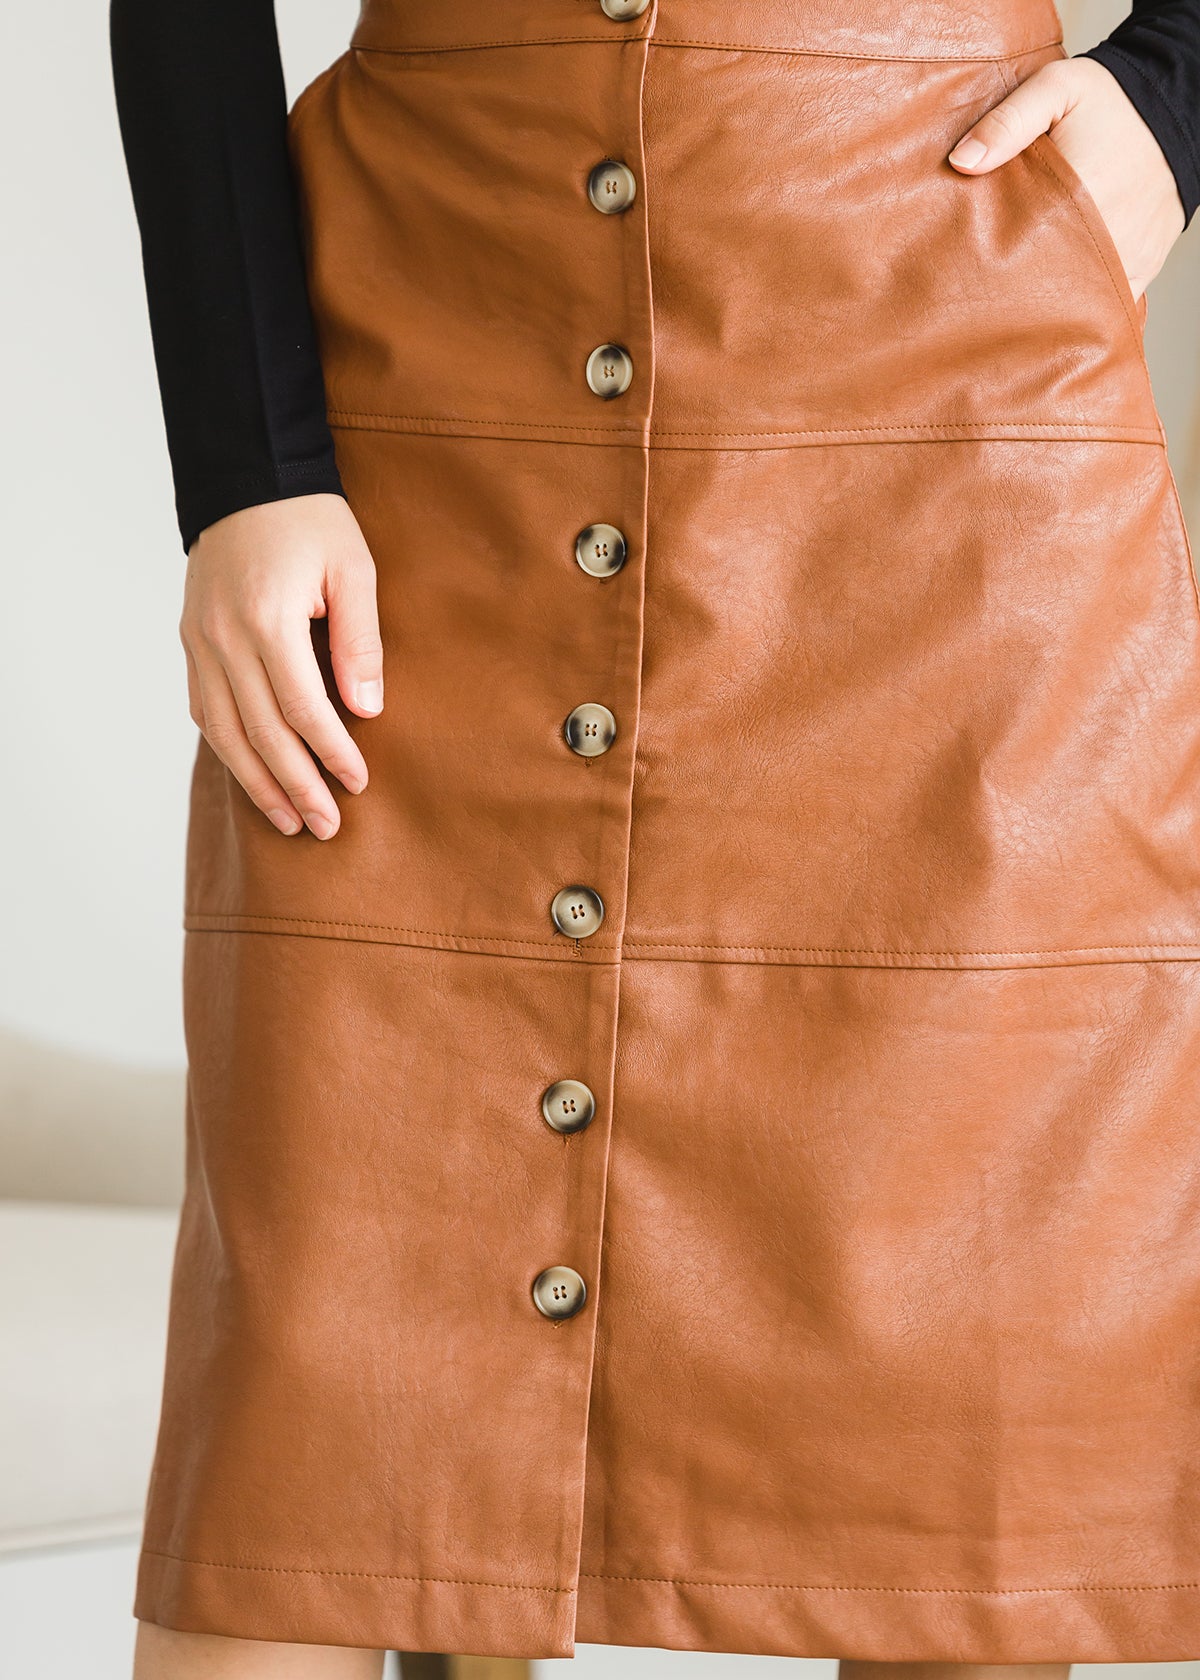 Button Front Faux Leather Midi Skirt - FINAL SALE Skirts